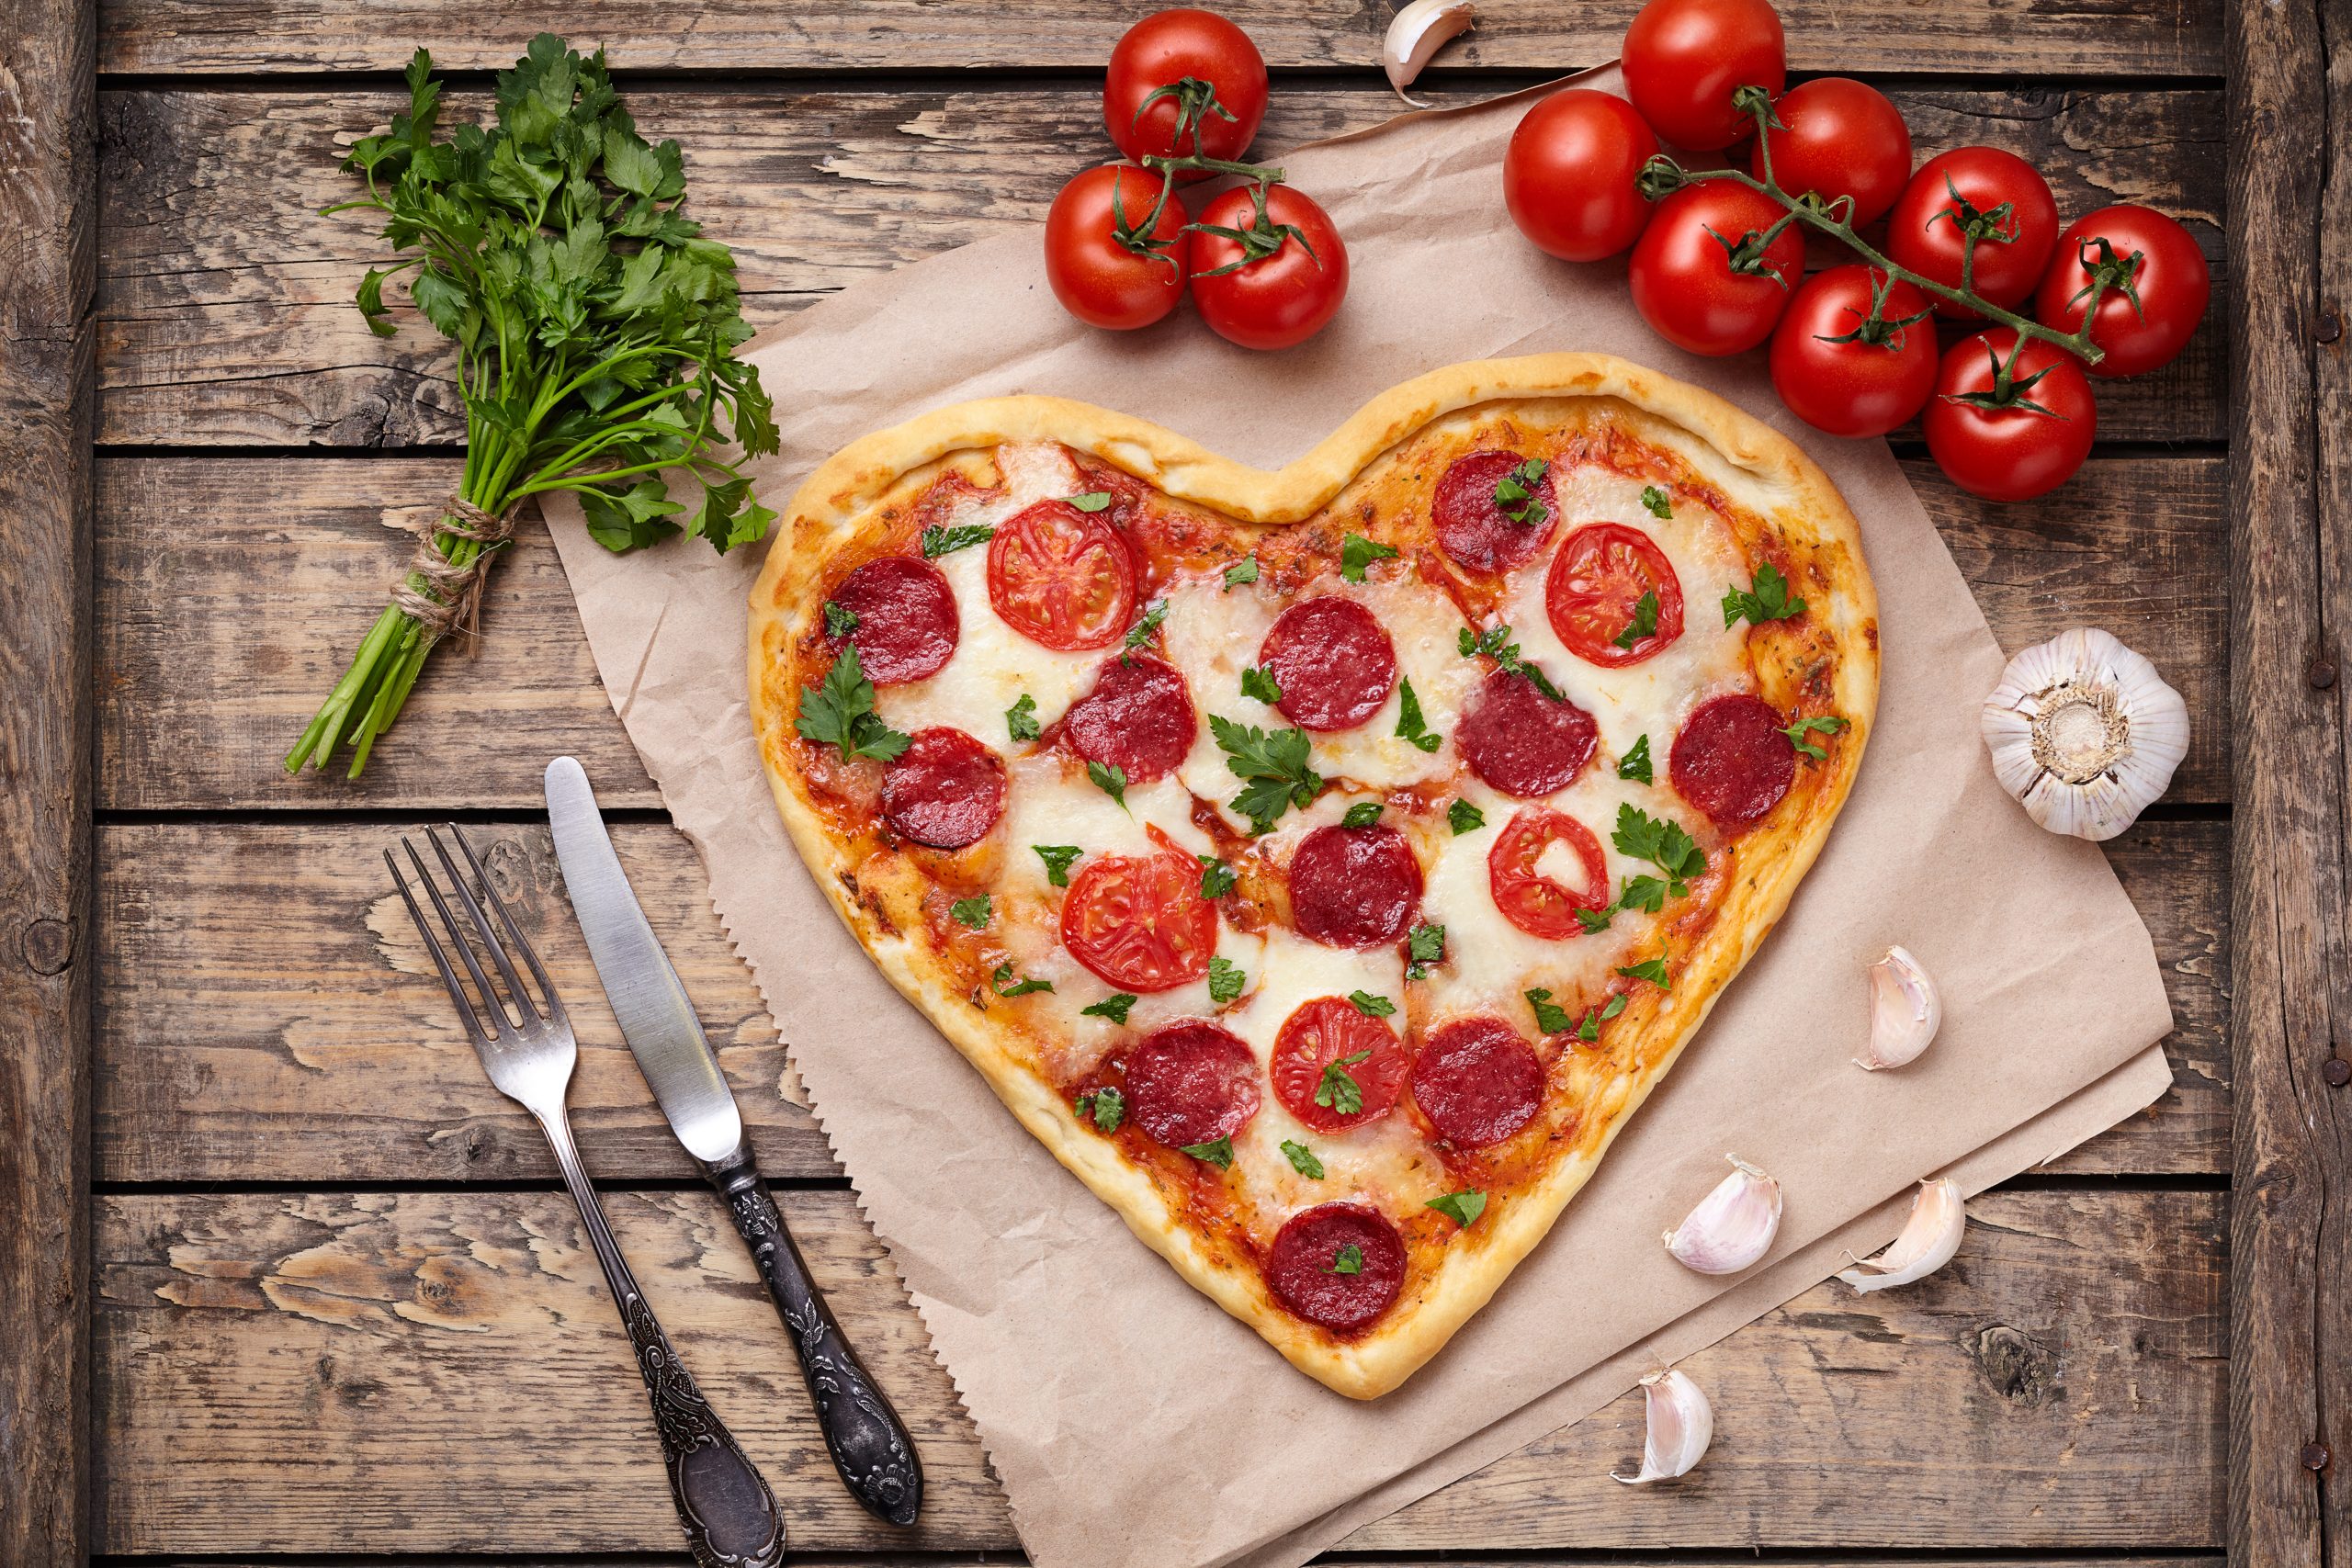 Heart shaped pizza for Valentines day with pepperoni, mozzarella, tomatoes, parsley and garlic on vintage wooden table background. Food symbol of romantic love.